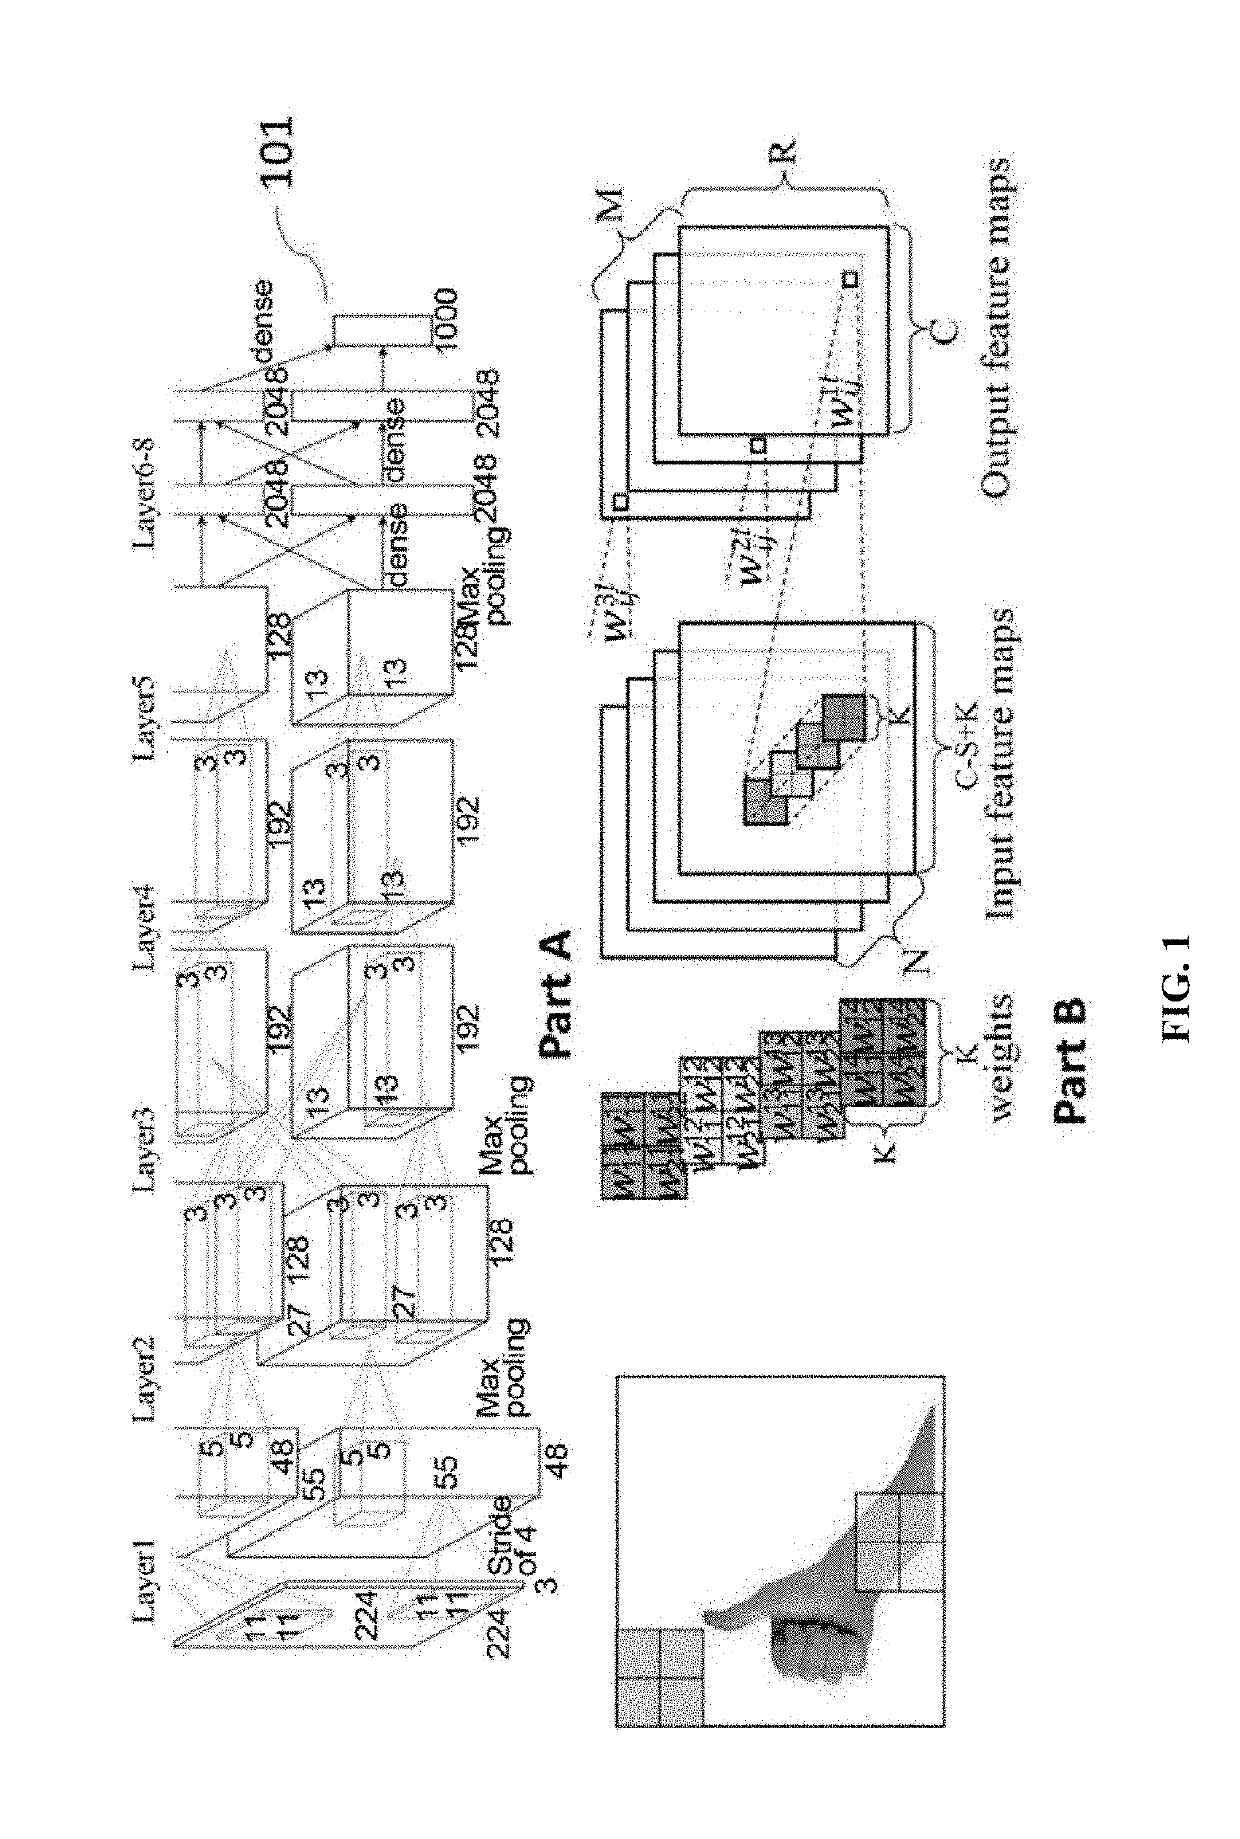 Systems and methods of data processing